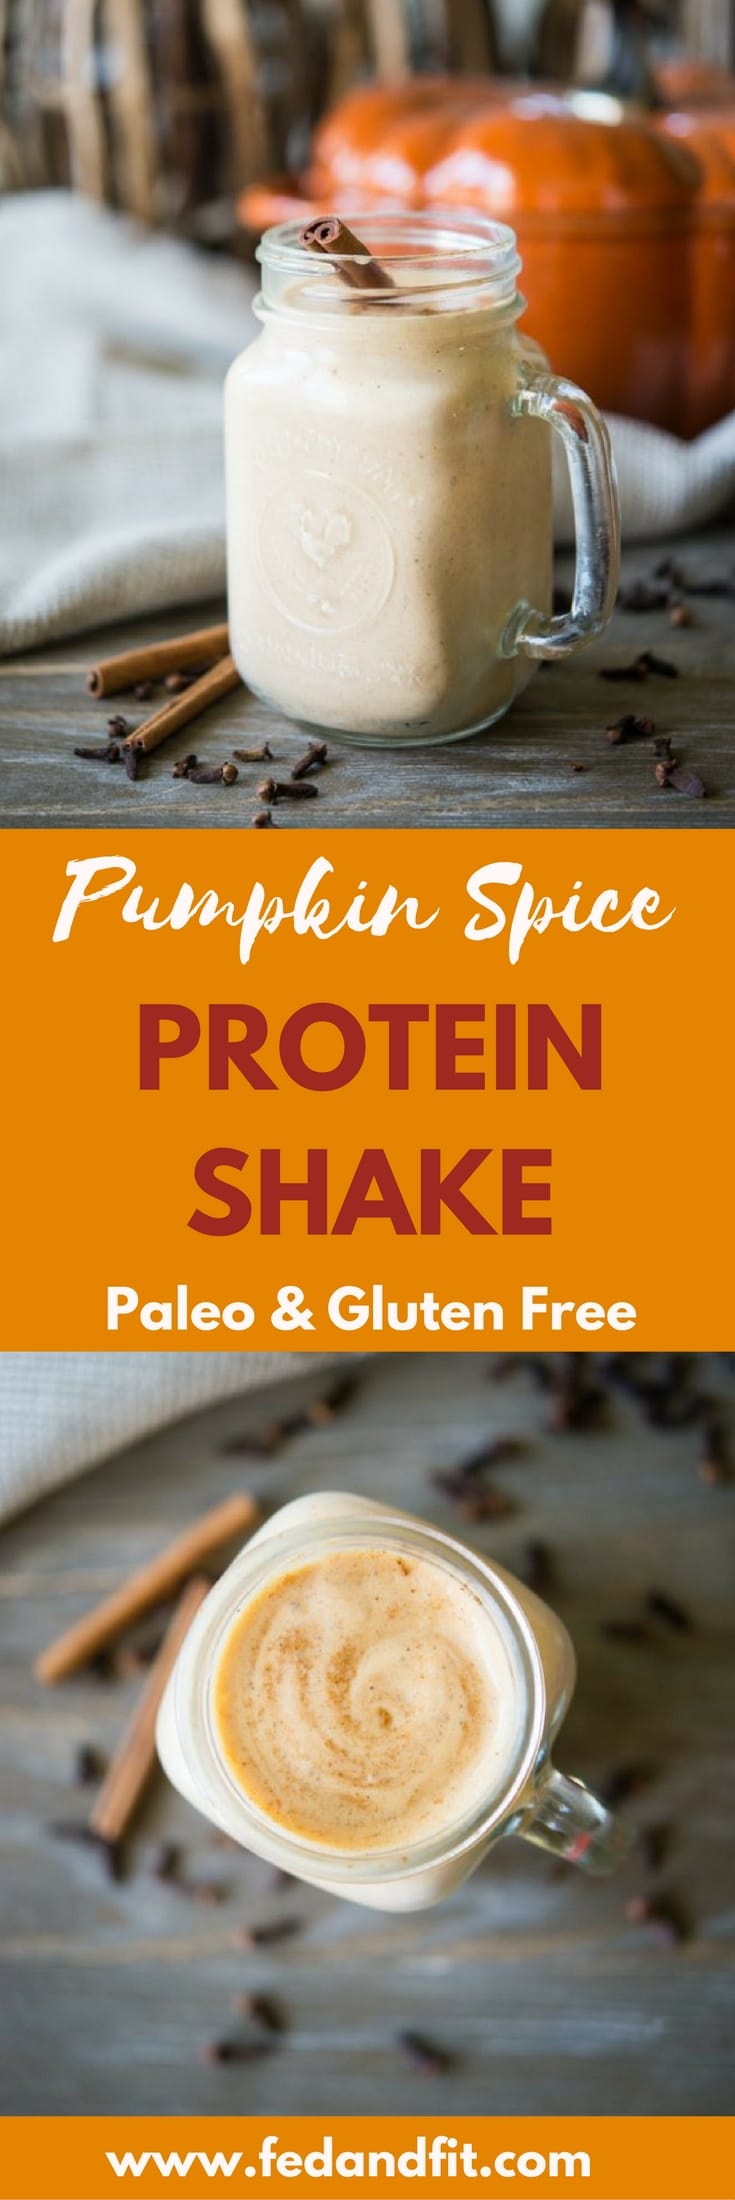 This Paleo-friendly pumpkin spice protein shake is made with healing spices, nourishing sweet potato, and protein powder for a simple and seasonal post-workout meal!